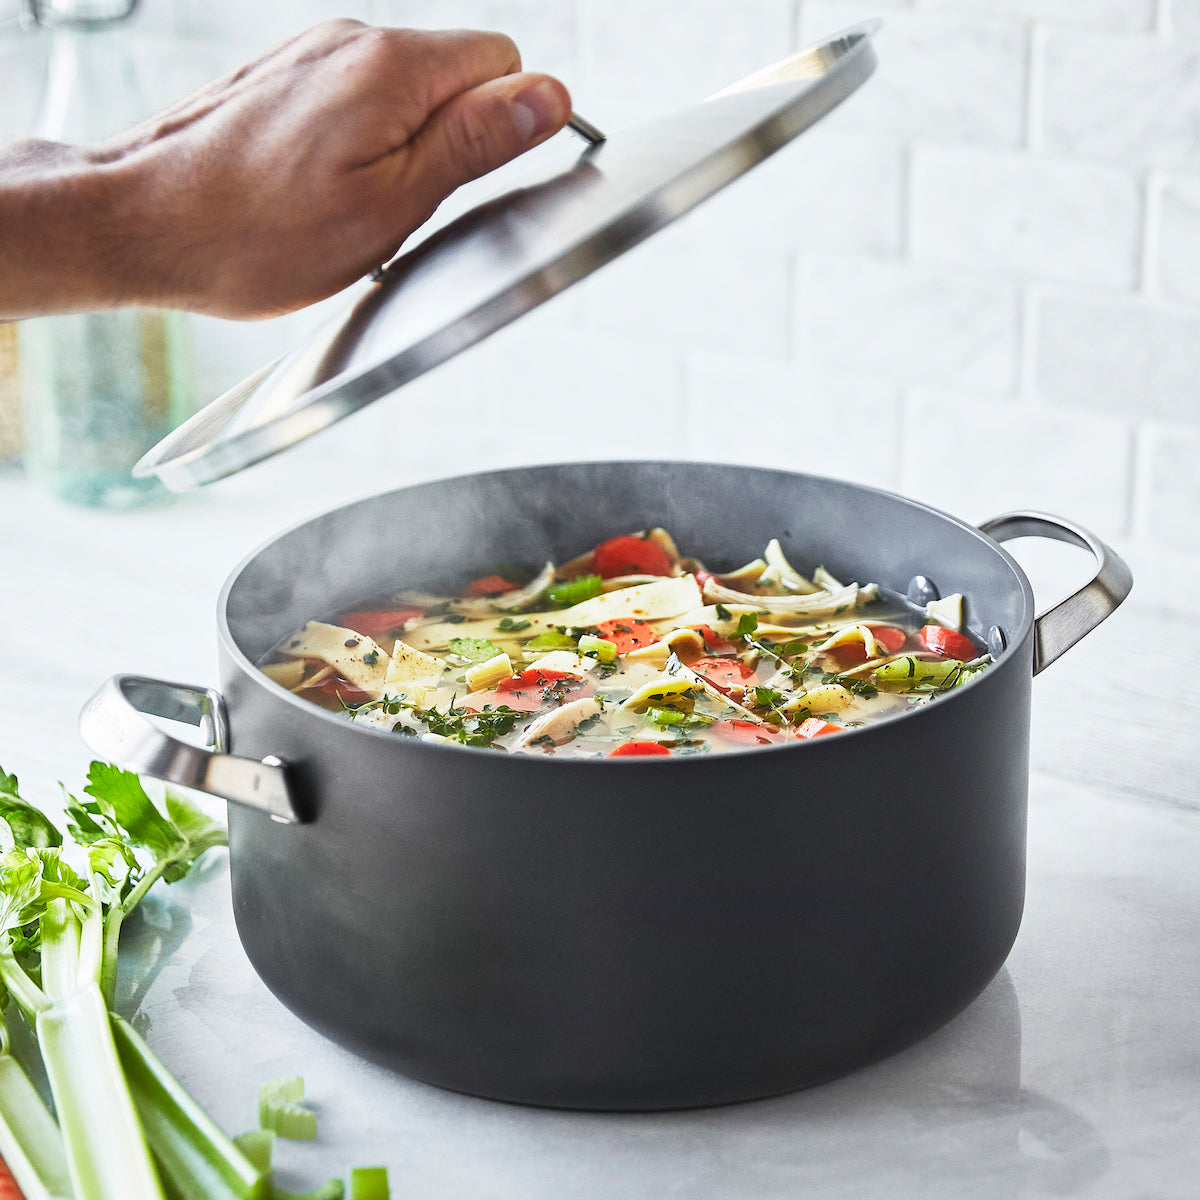 Safe-T-Grip 9 and 11 Ceramic Nonstick Fry Pans with Lids